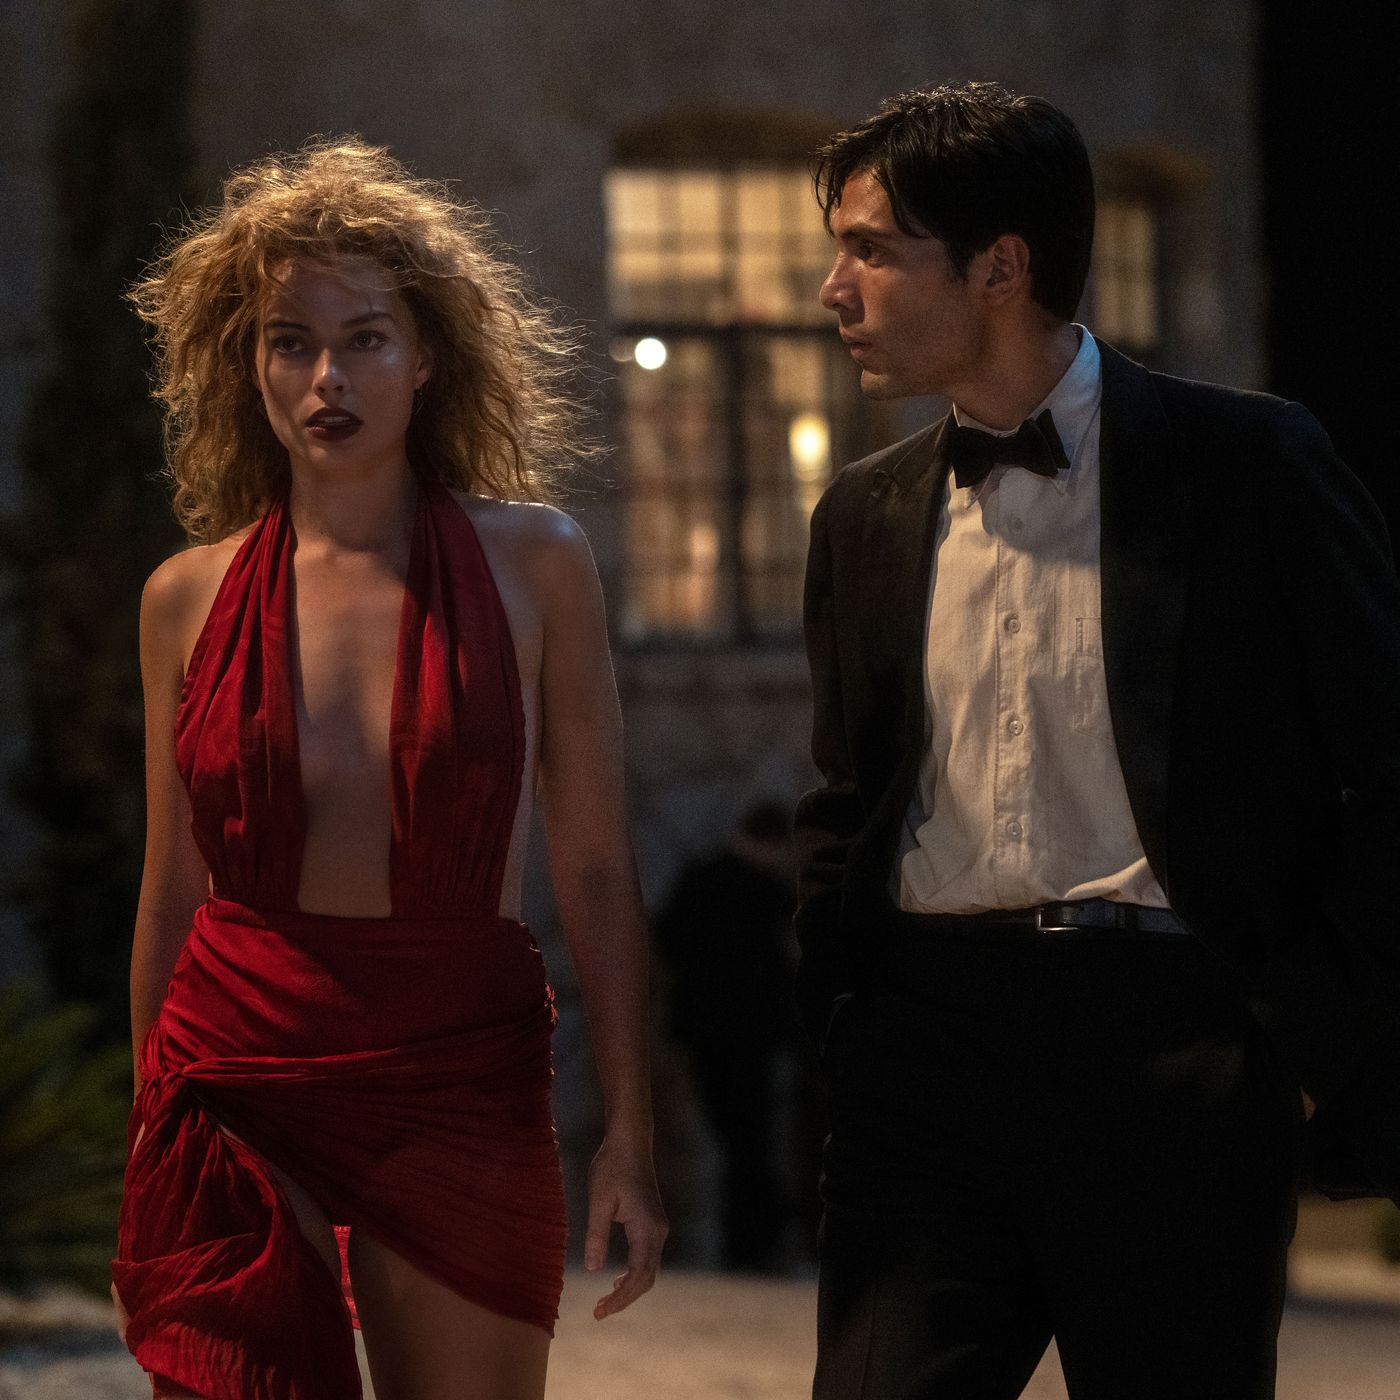 Babylon Movie Review Damien Chazelle, Wheres the Thrill? image